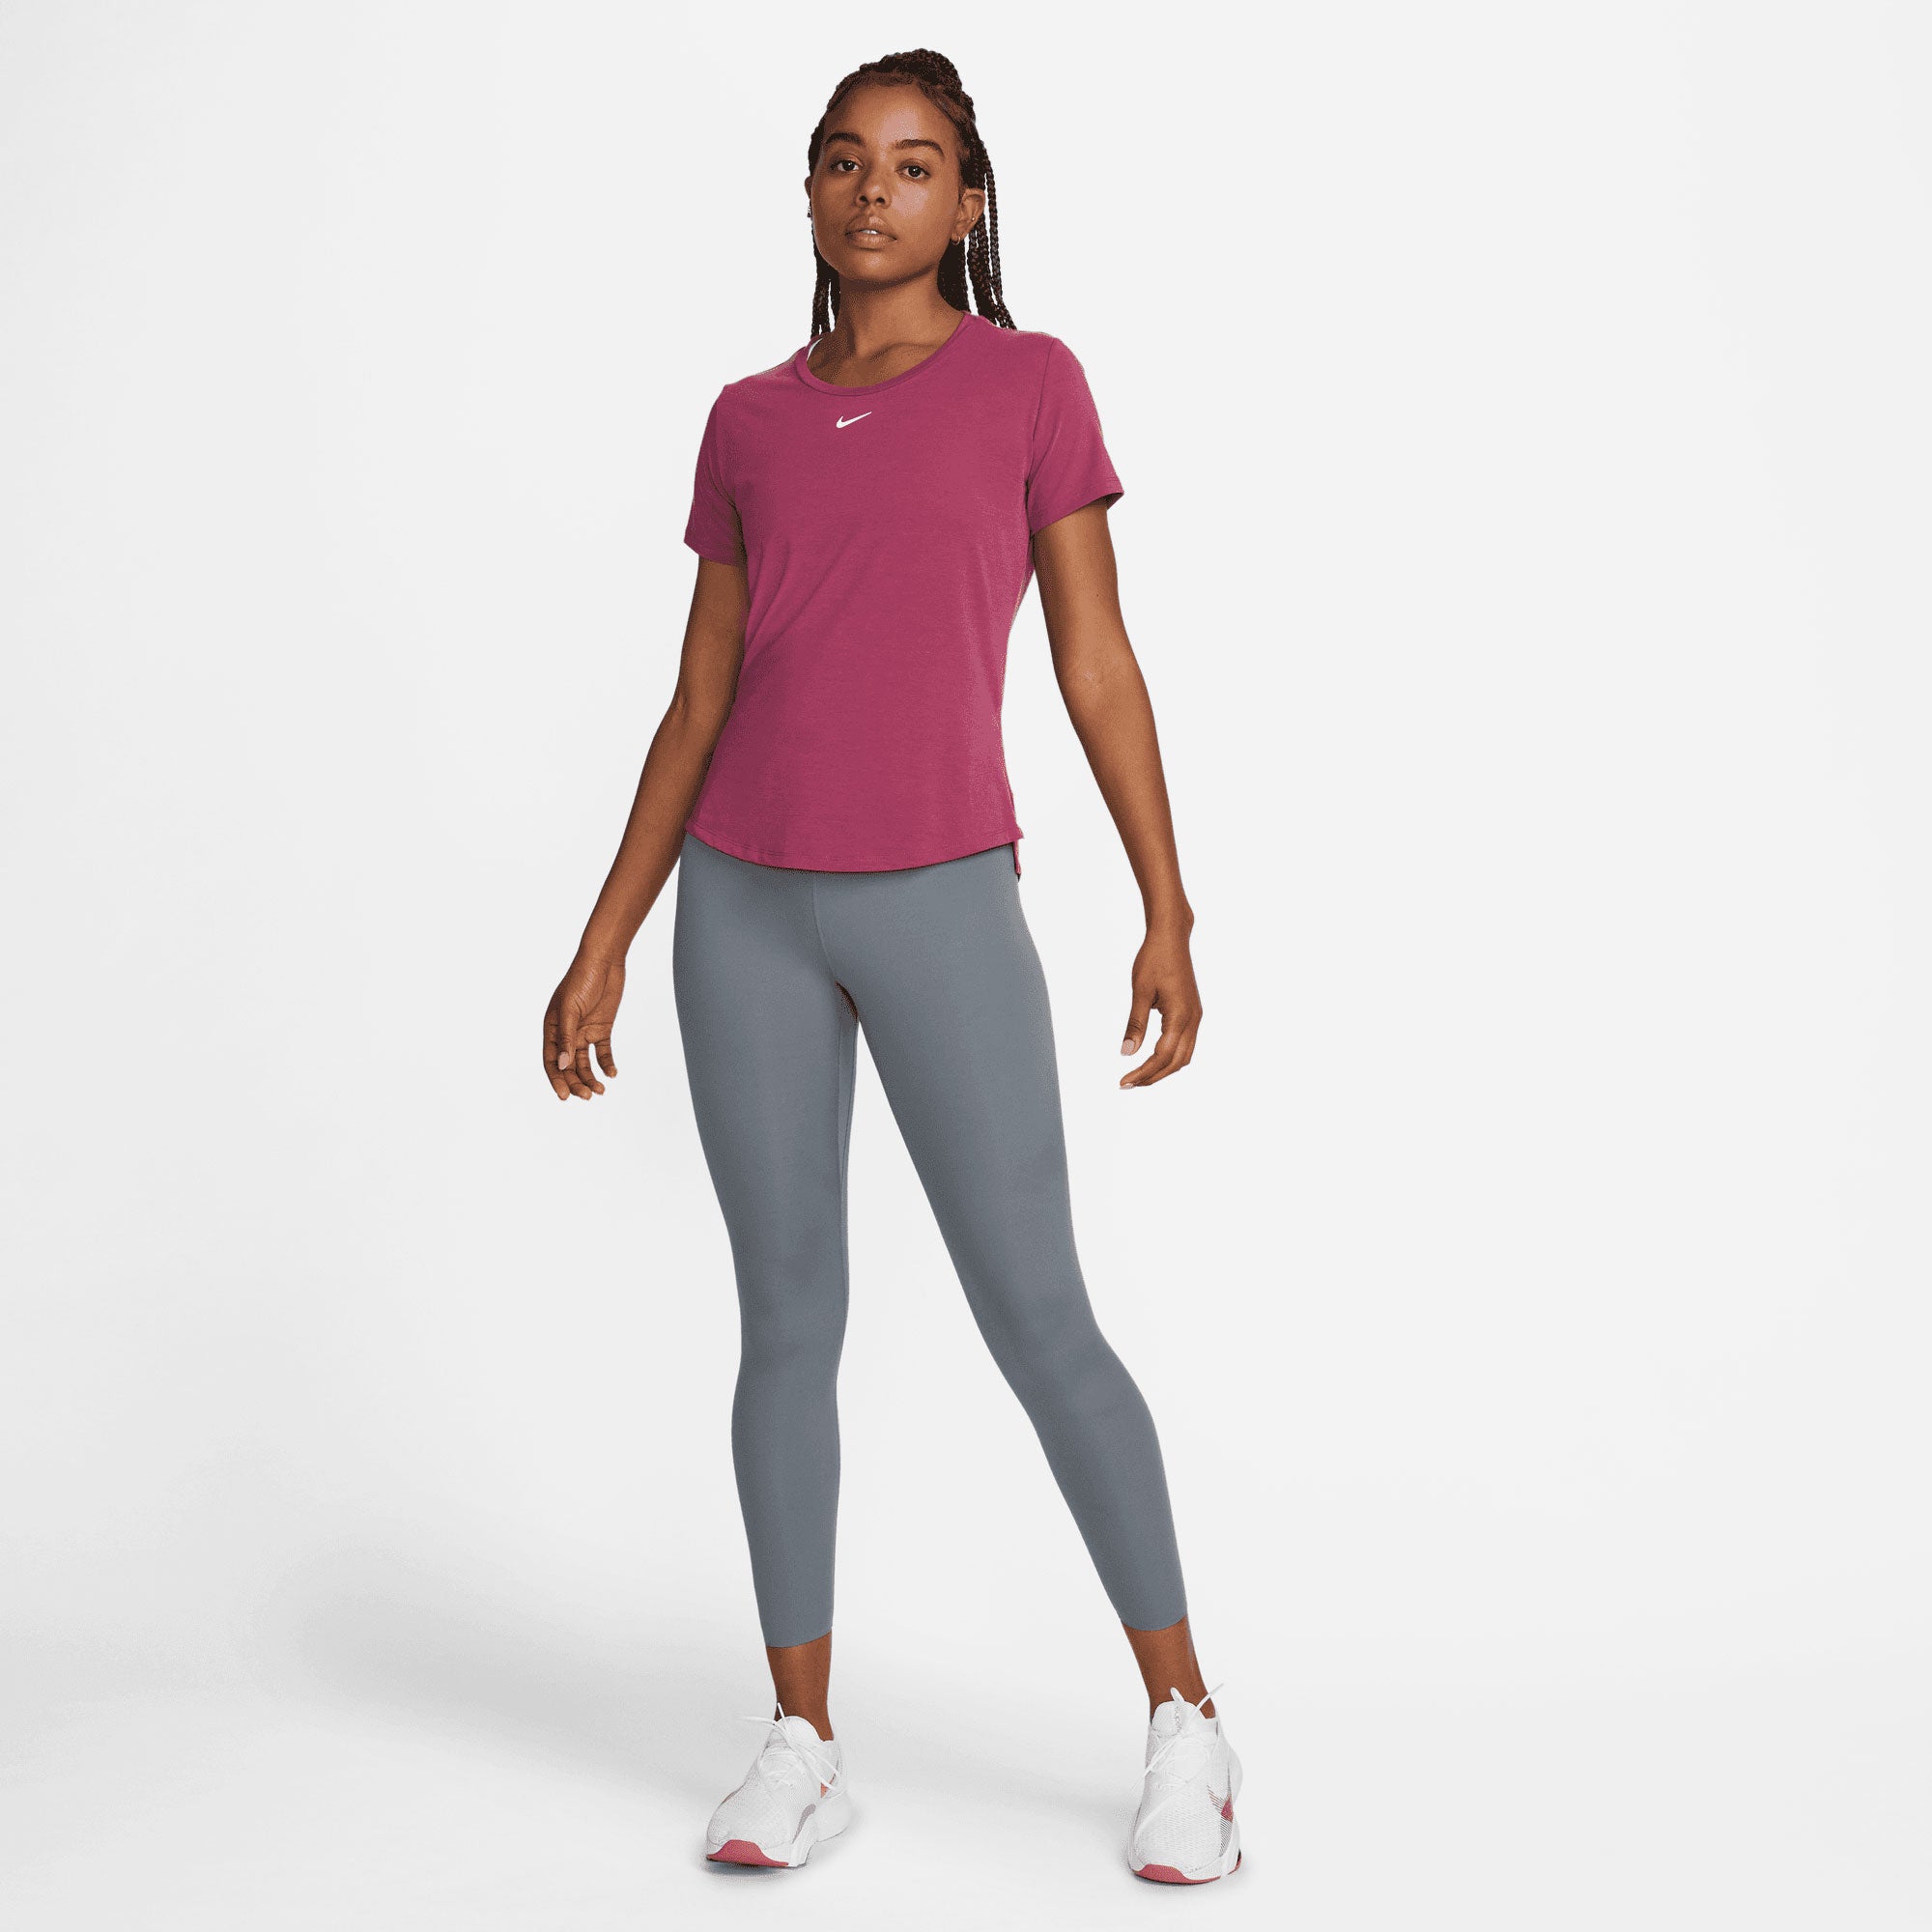 Nike One Luxe Dri-FIT Women's Standard Fit Shirt Red (5)